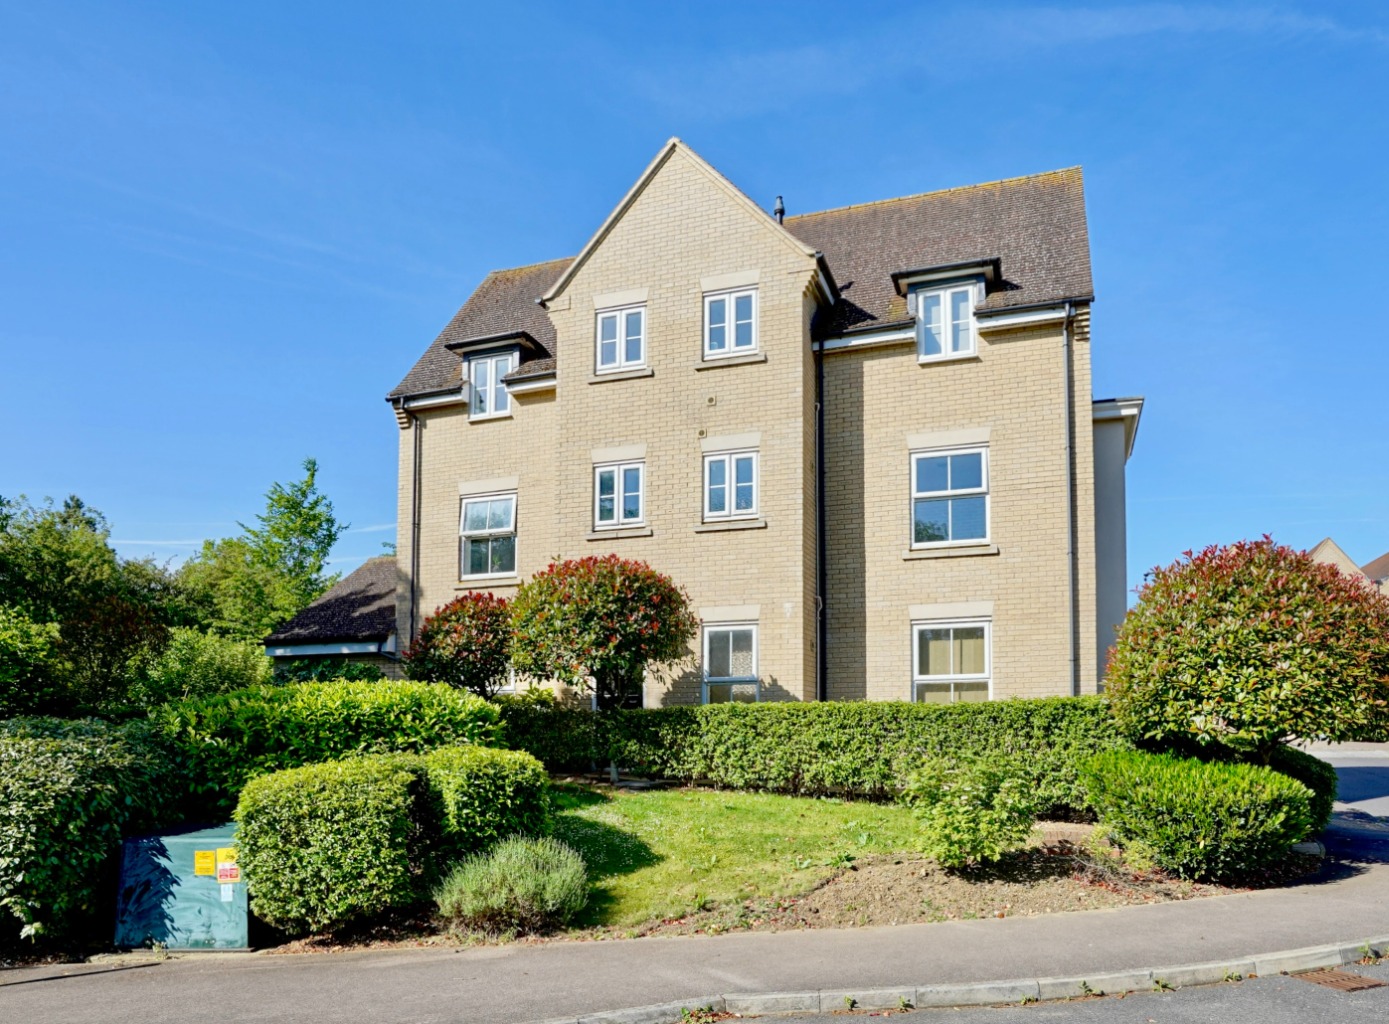 2 bed flat for sale in Stokes Drive, Huntingdon - Property Image 1